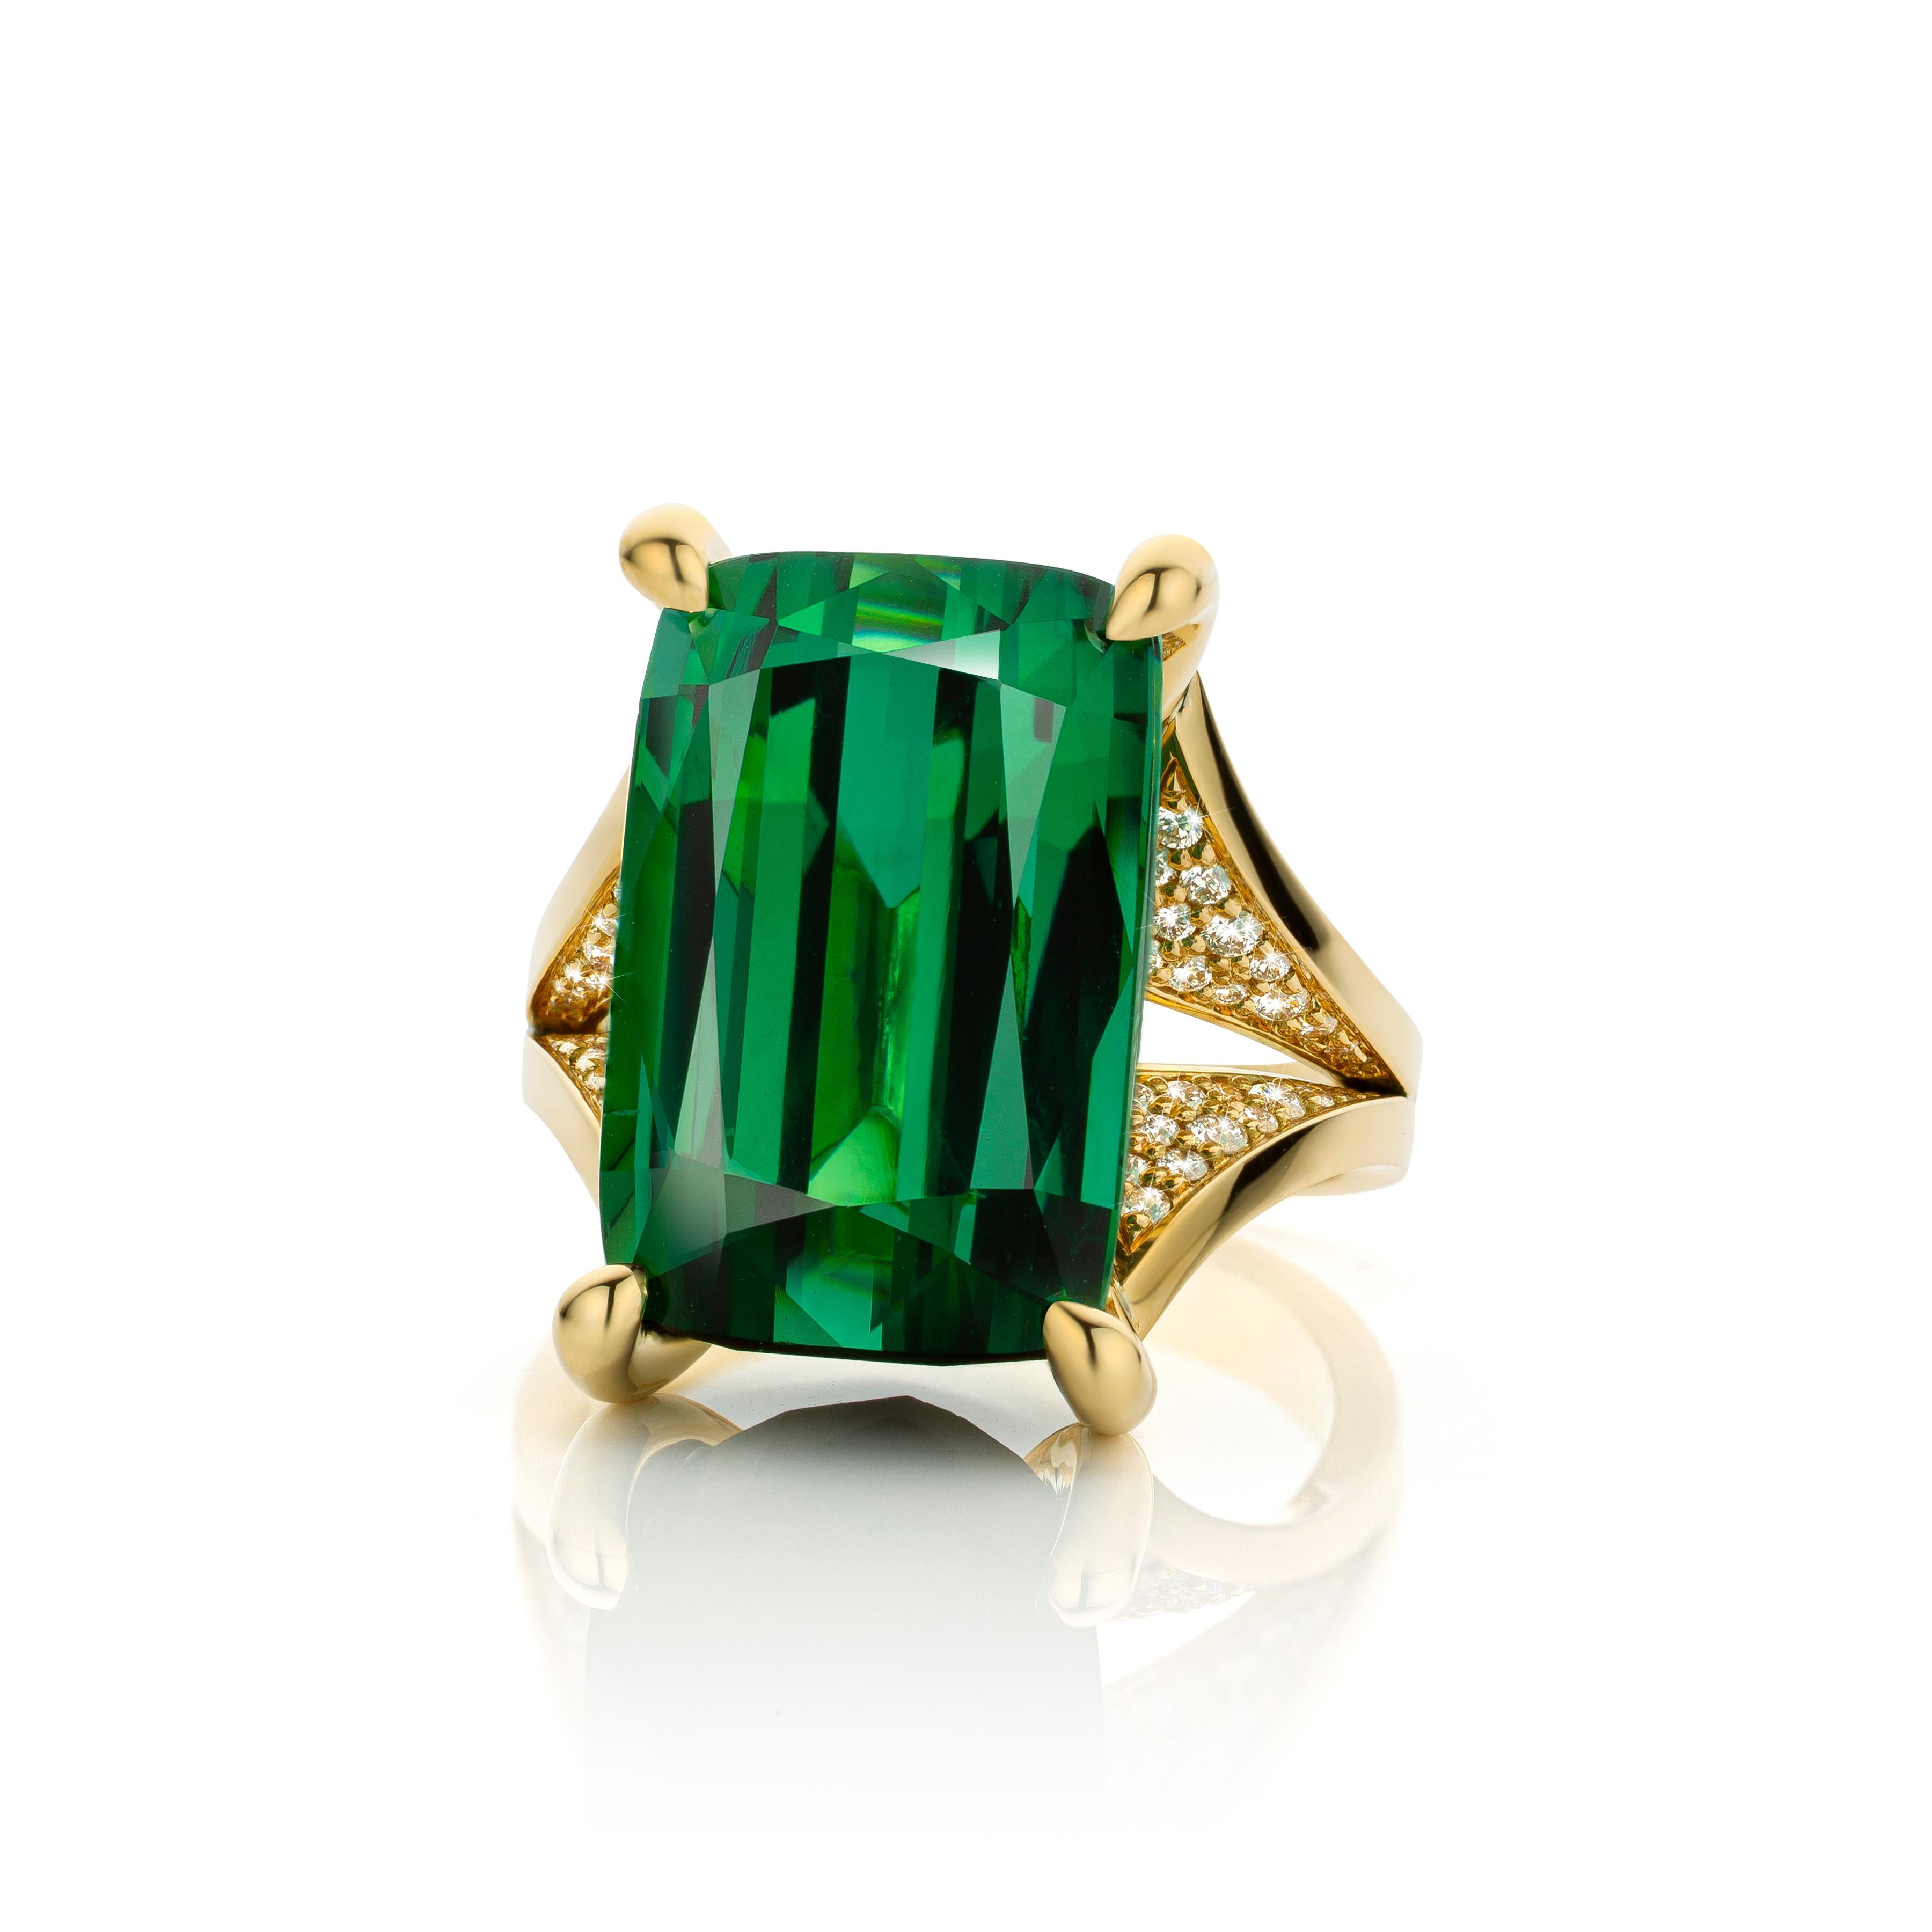 Contemporary Cober “Stunning Green” with a 8.09 Carat Tourmaline and 56 Diamonds Fashion Ring For Sale